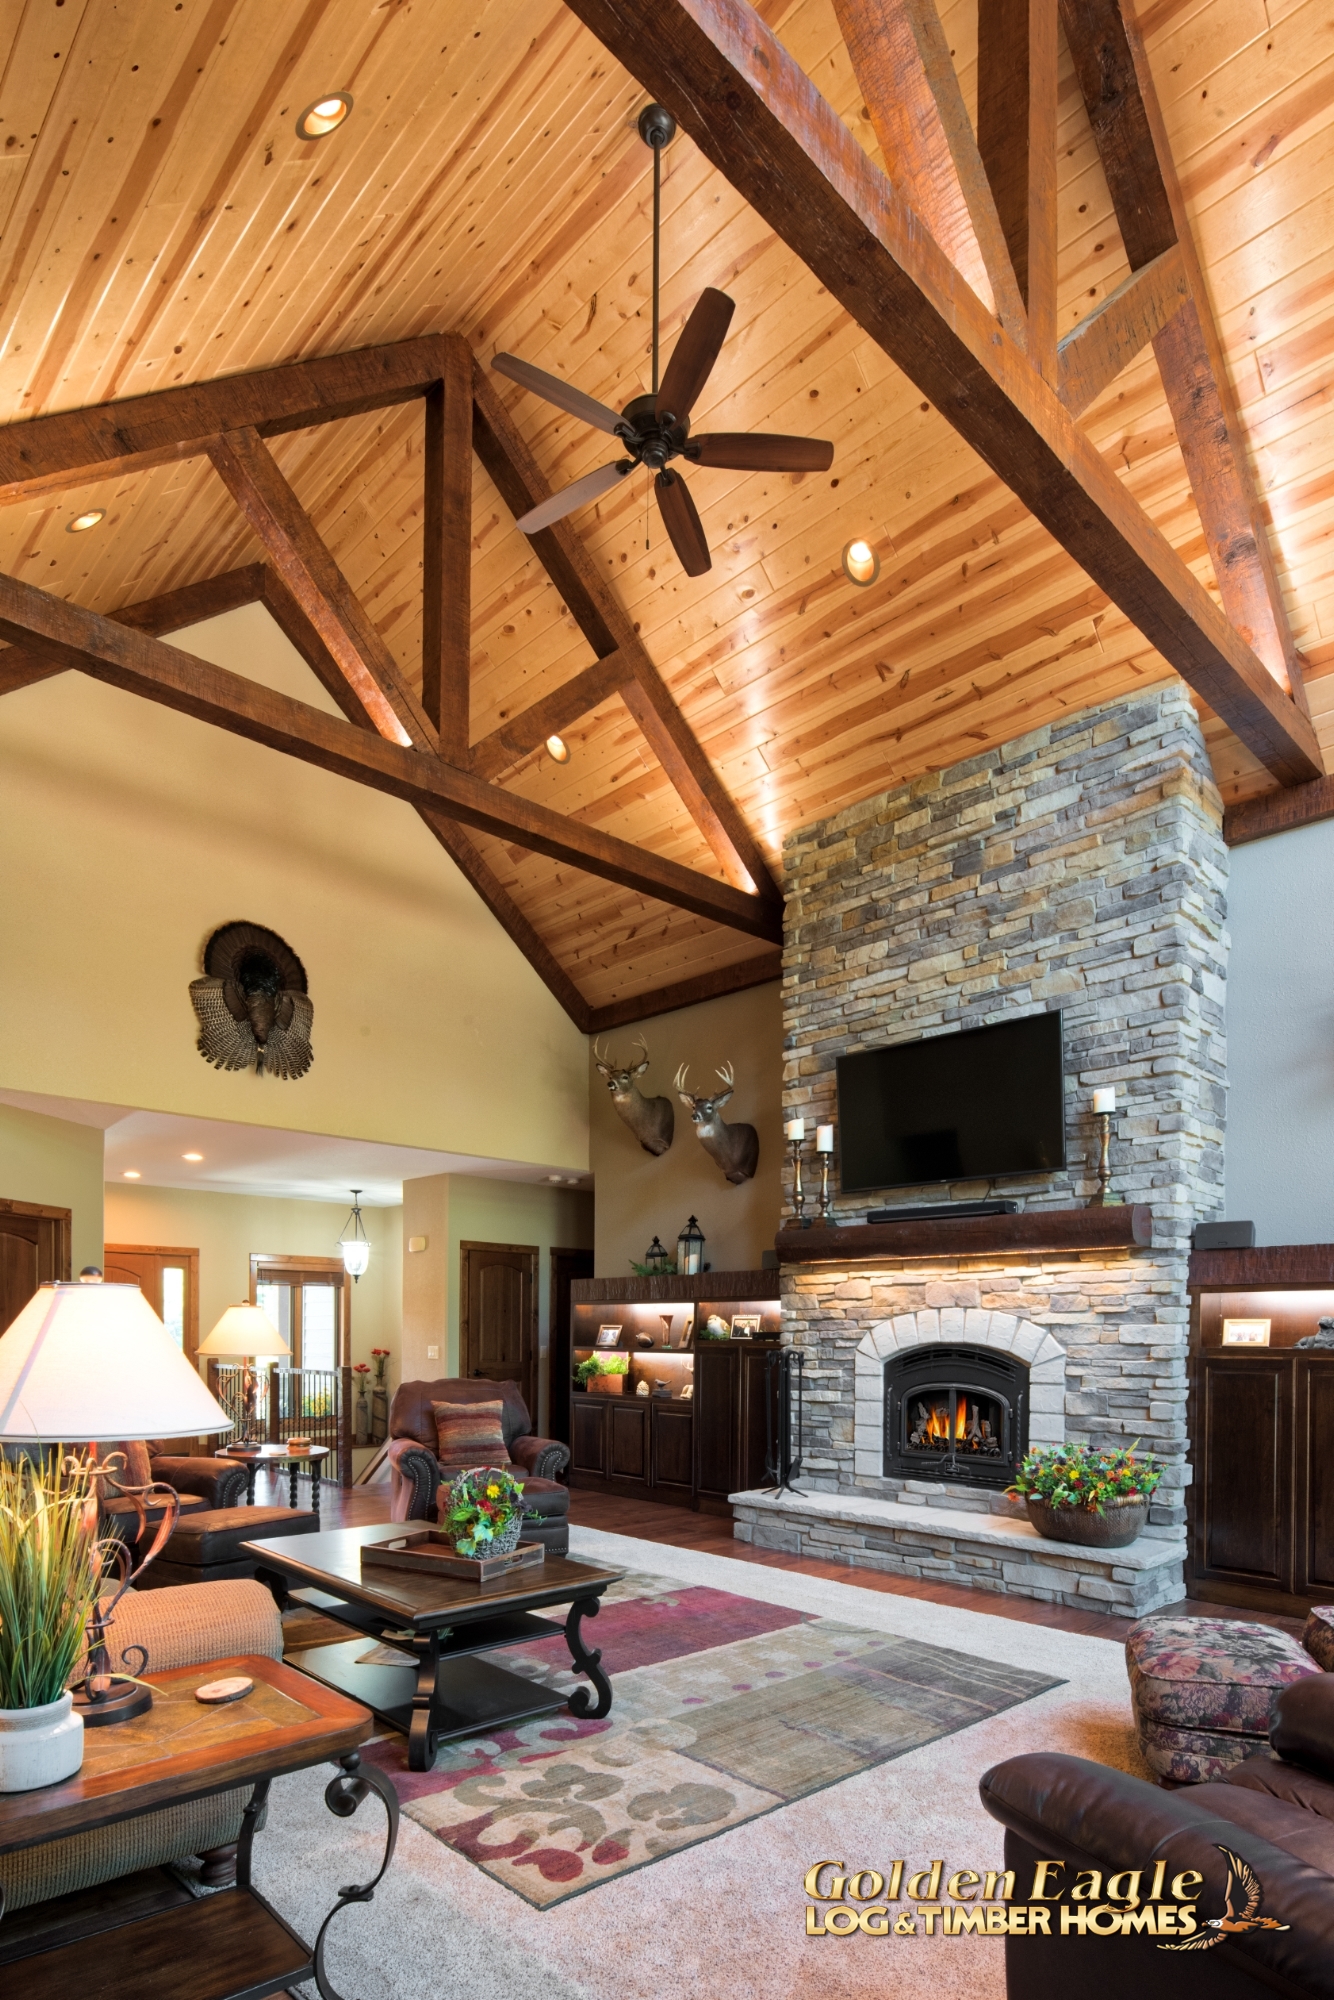 Golden Eagle Log And Timber Homes Exposed Beam Timber Frame